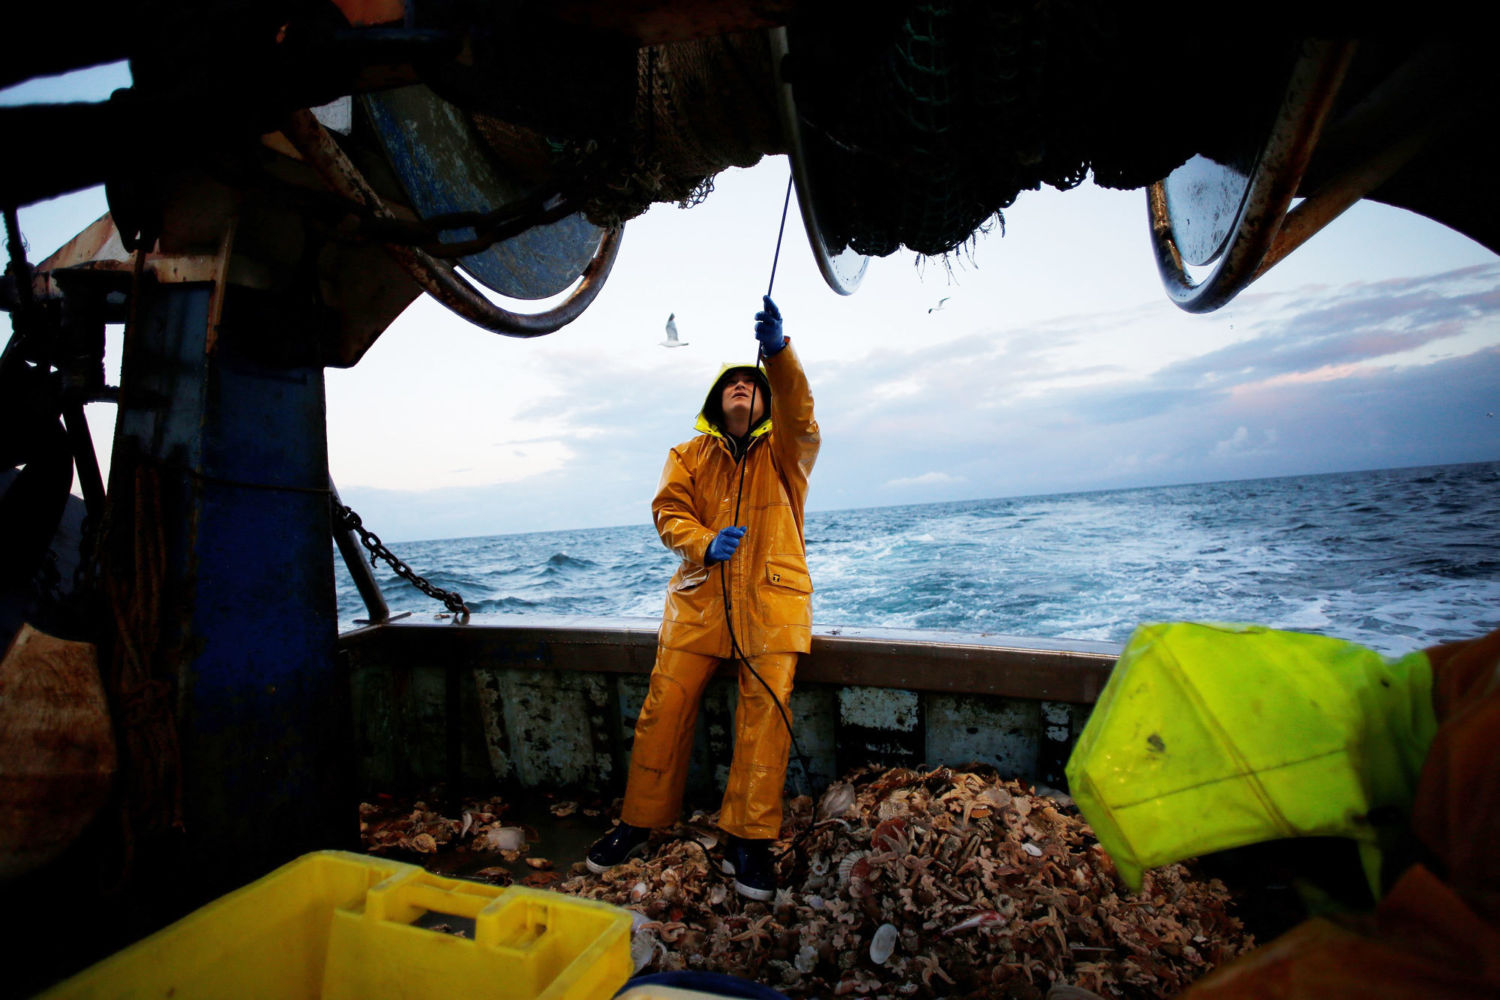 Marine Reserves Could Help Make Commercial Fishing More Profitable